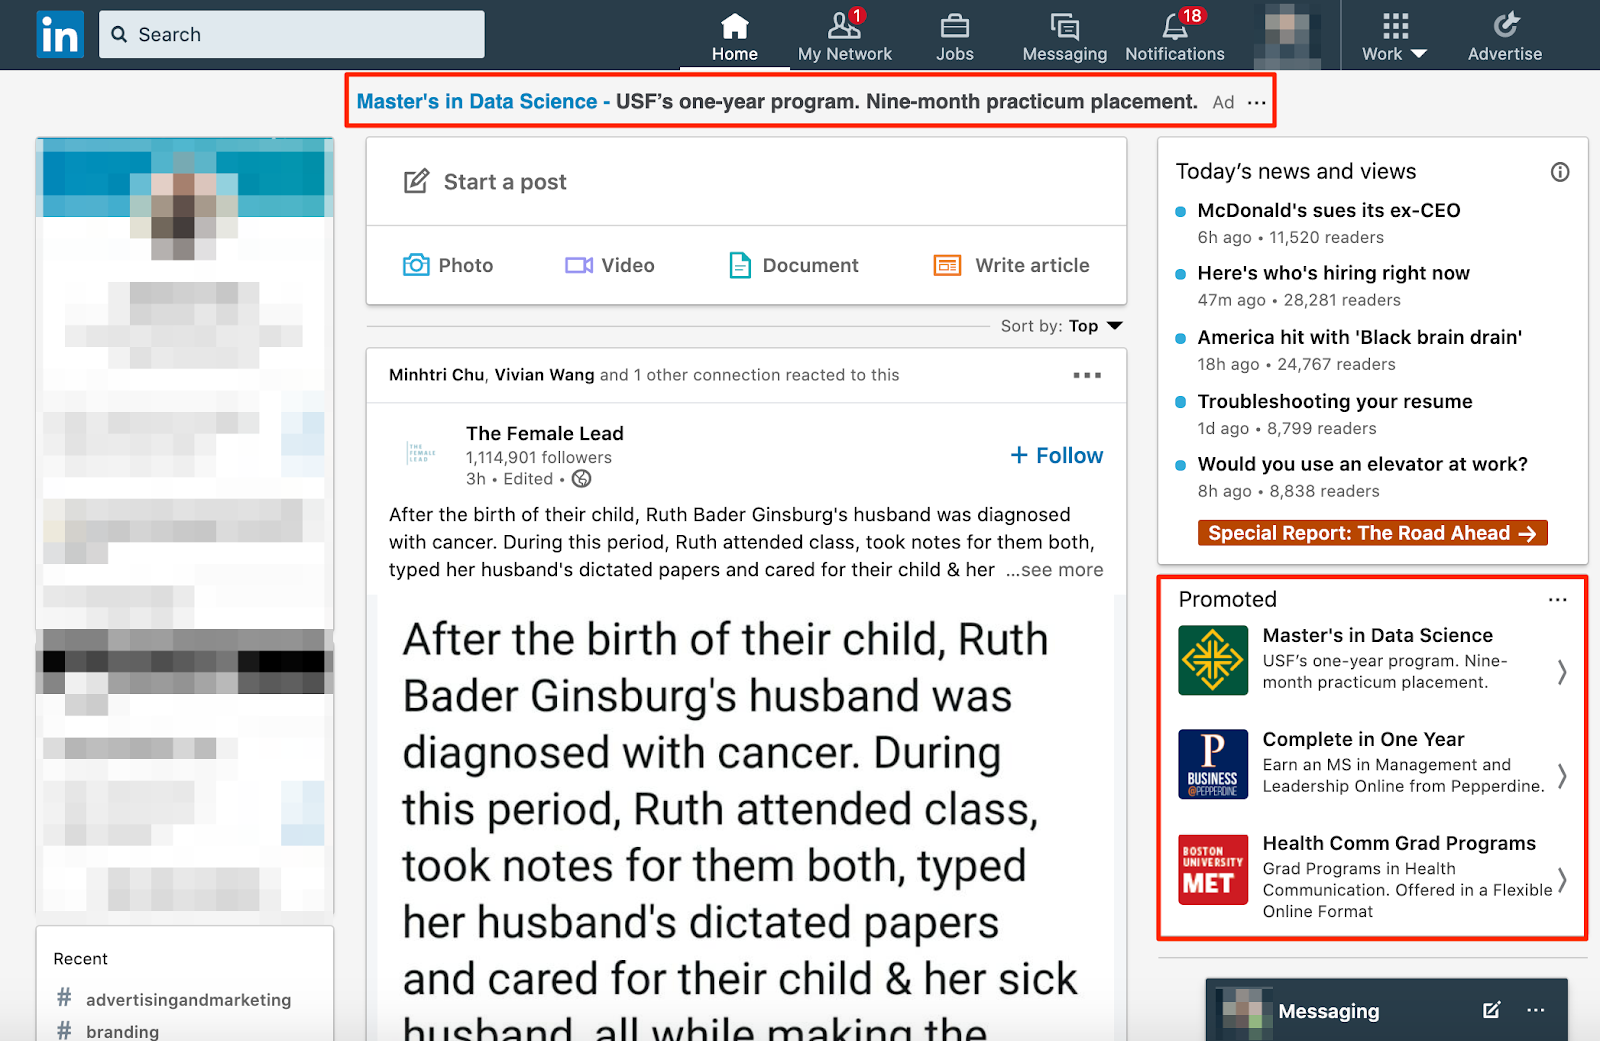 Screenshot of Text Ads in the top and right sidebar areas of LinkedIn.